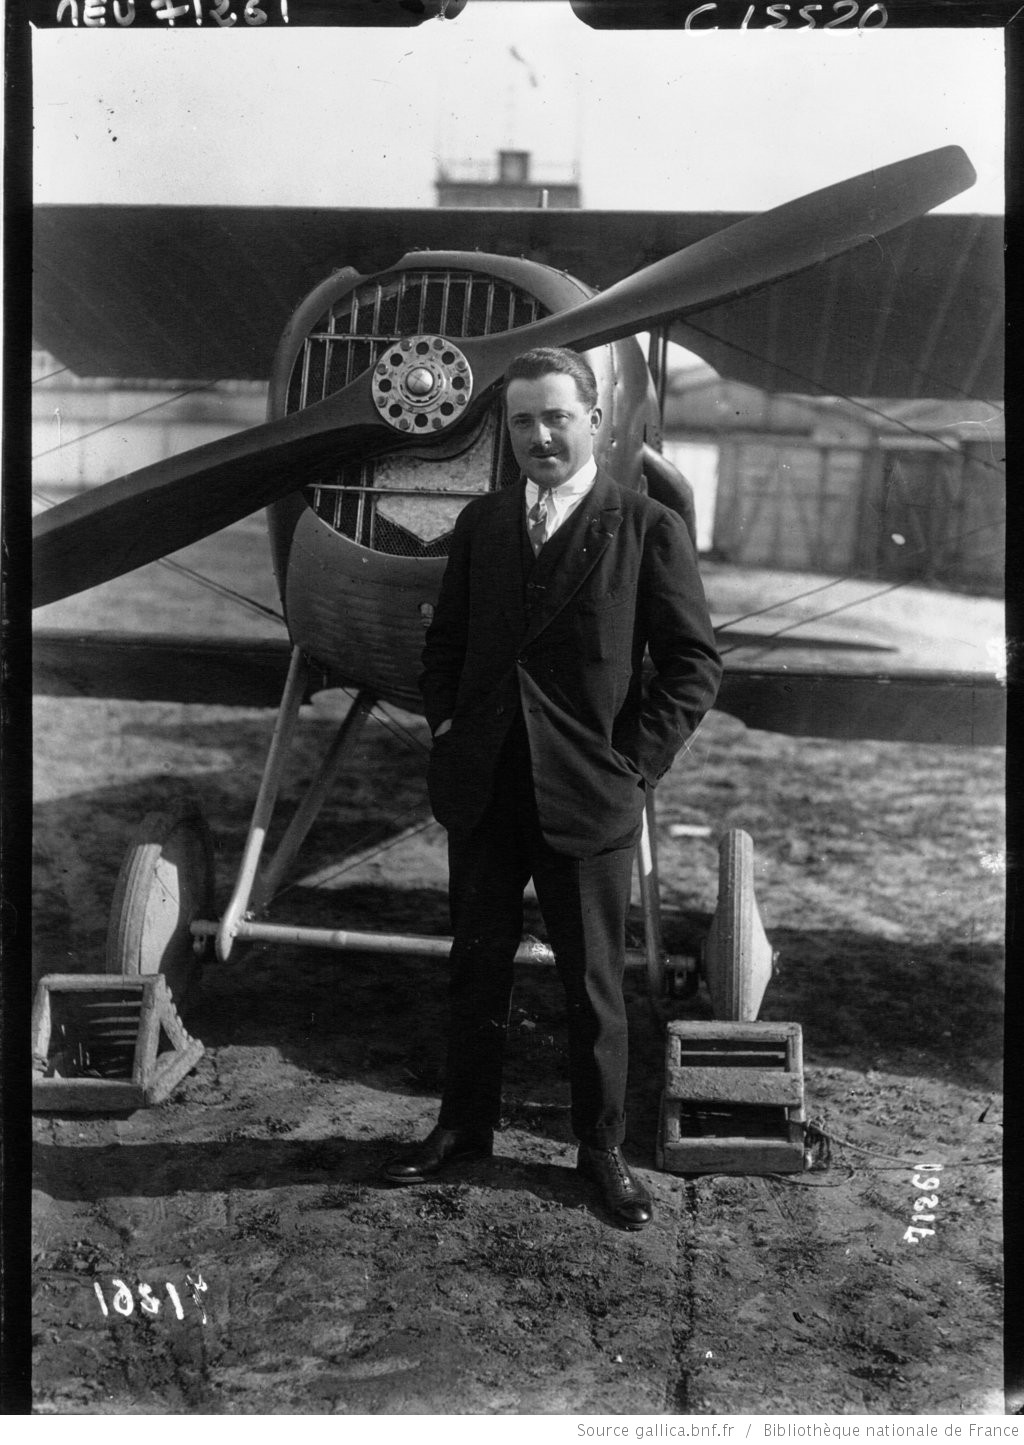 Joseph Sadi-Lecointe was a test pilot for the SPAD S.VII C.1 fighter